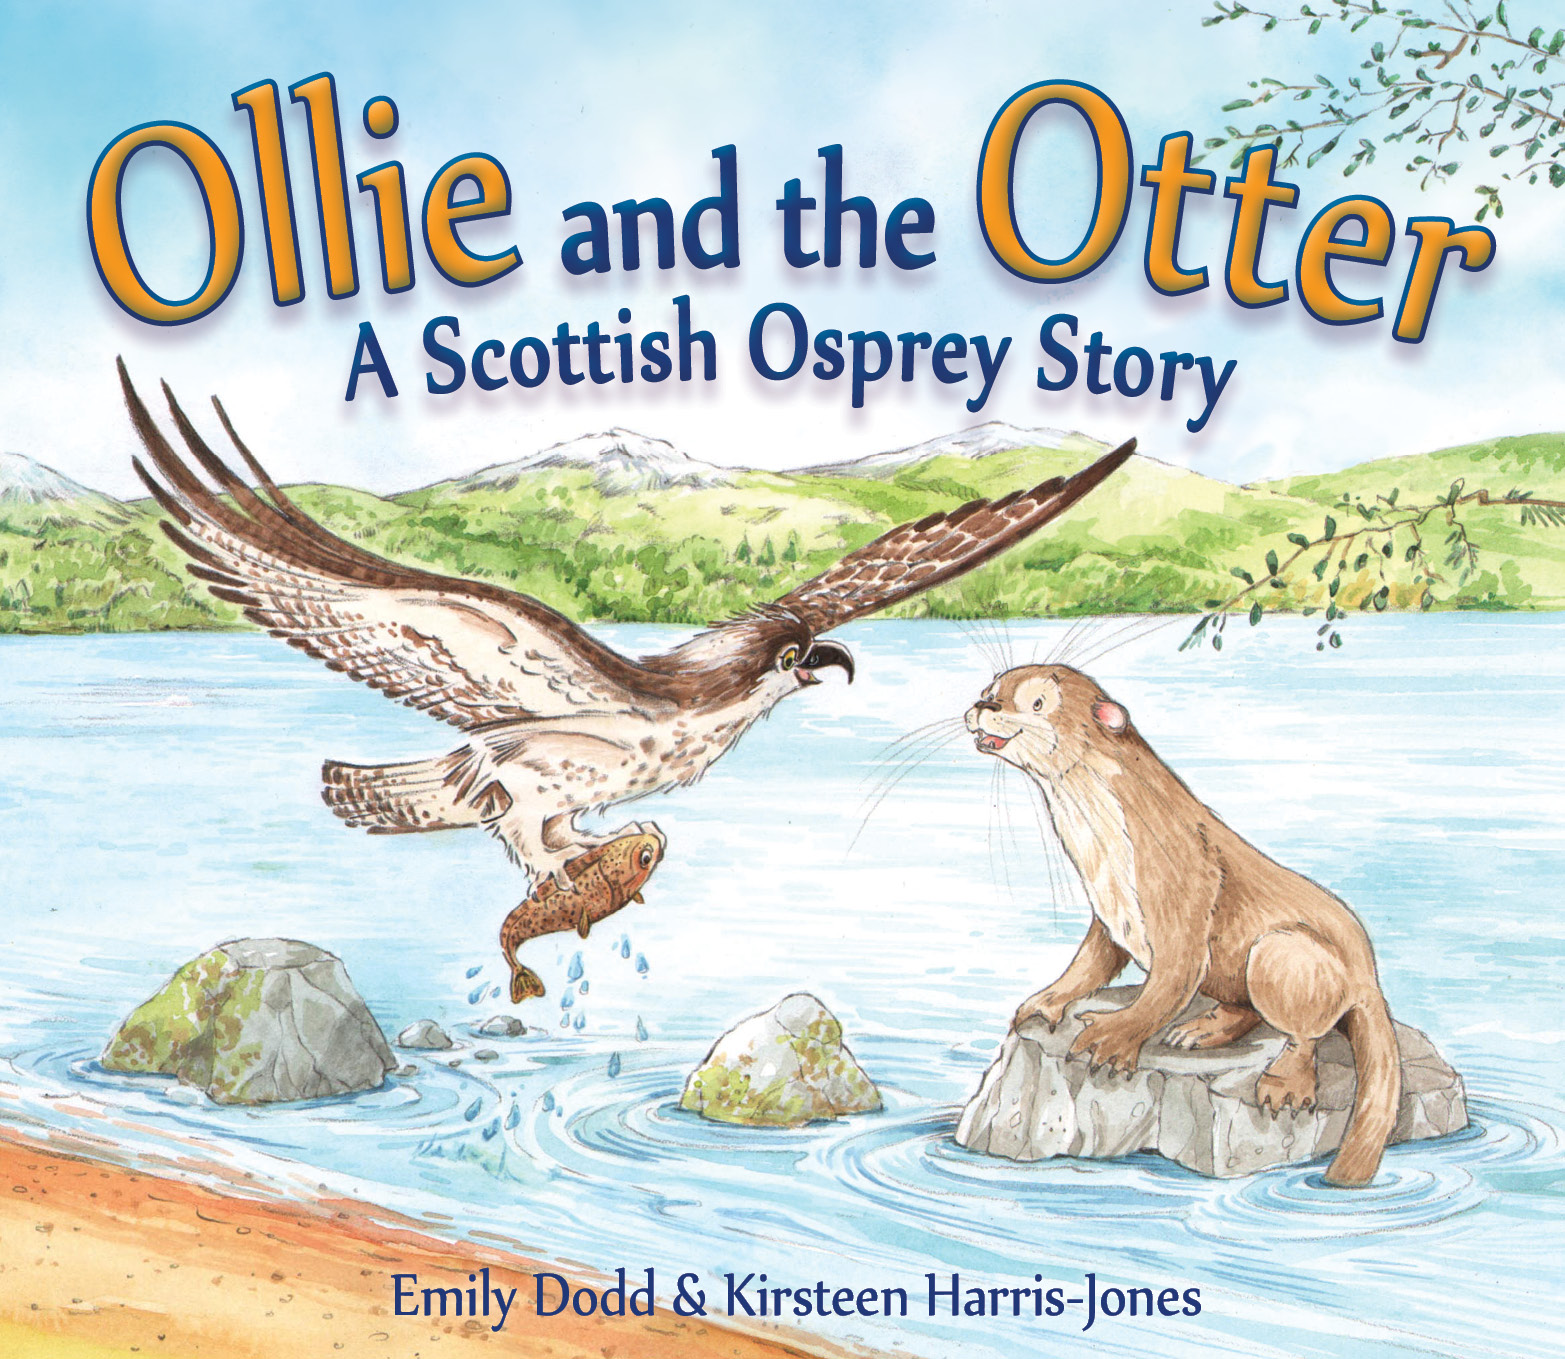 ollie-and-the-otter-1-orange-and-blue-text